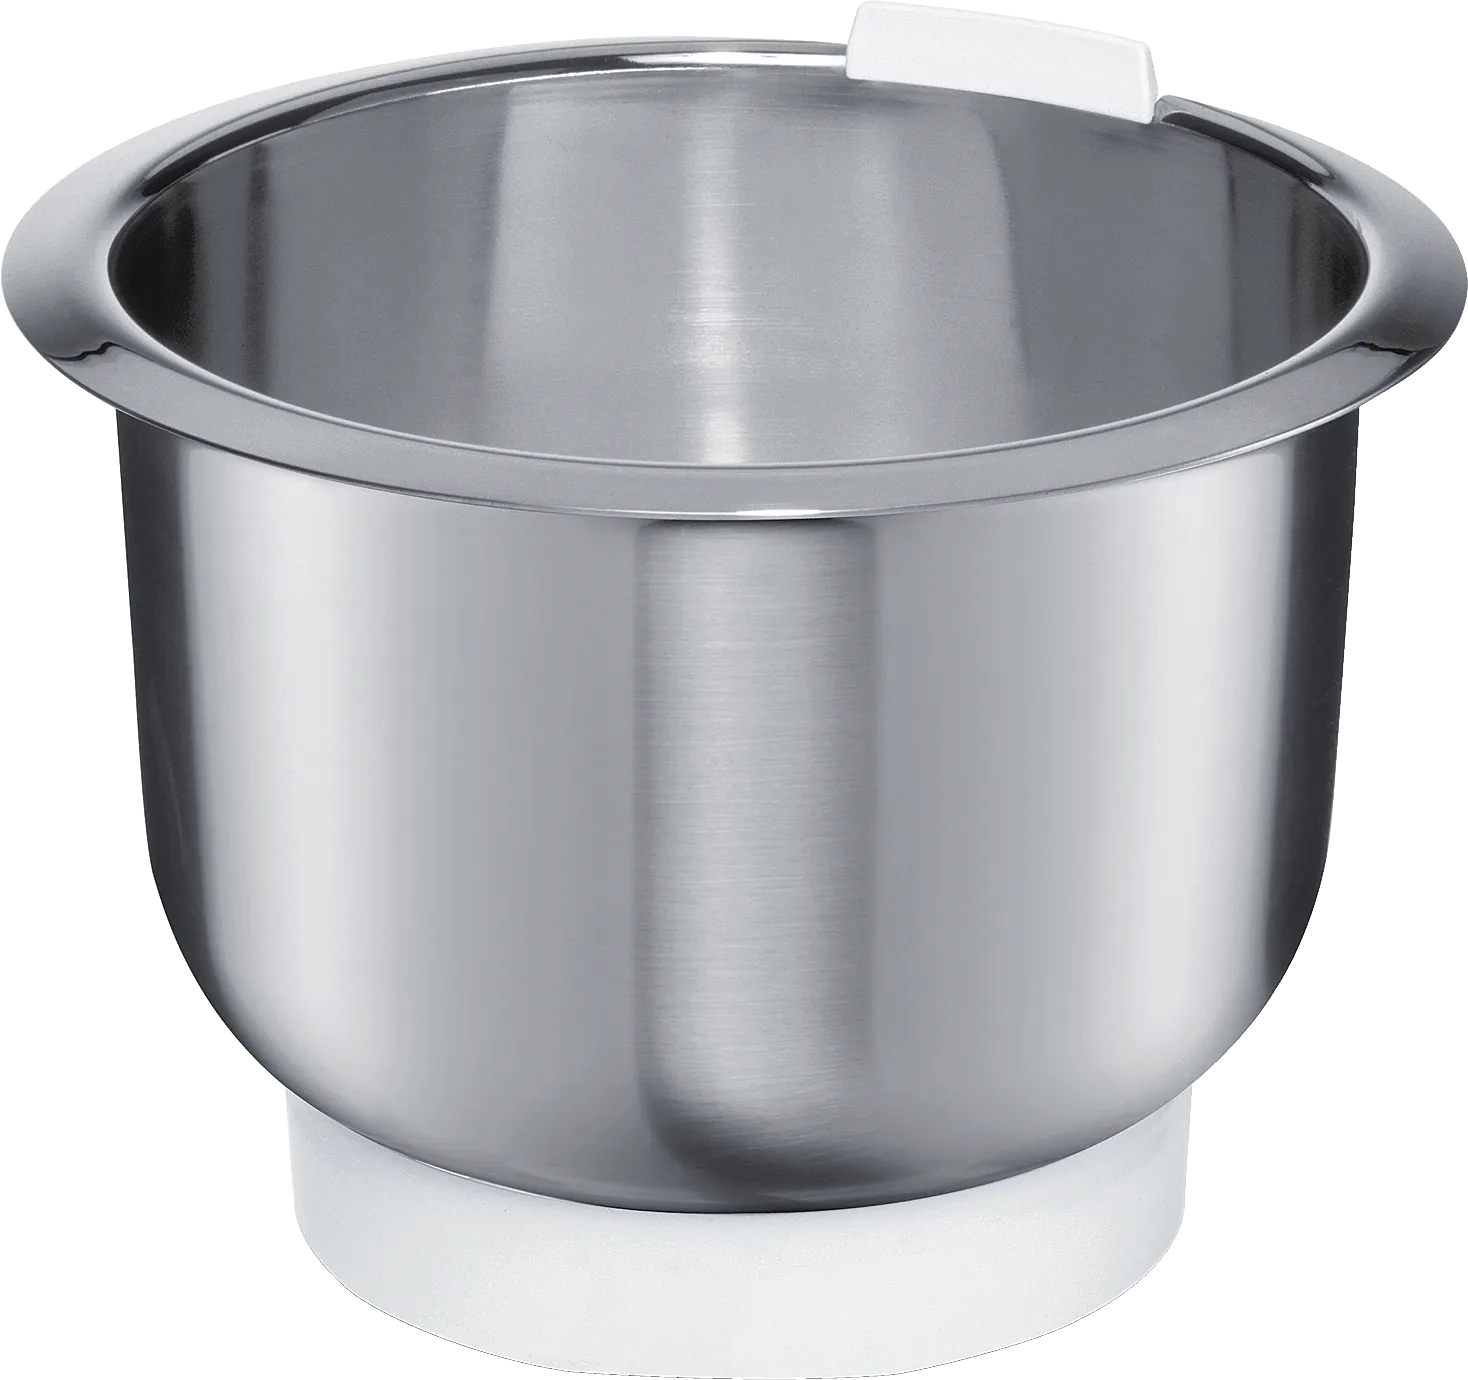 Stainless steel mixing bowl 